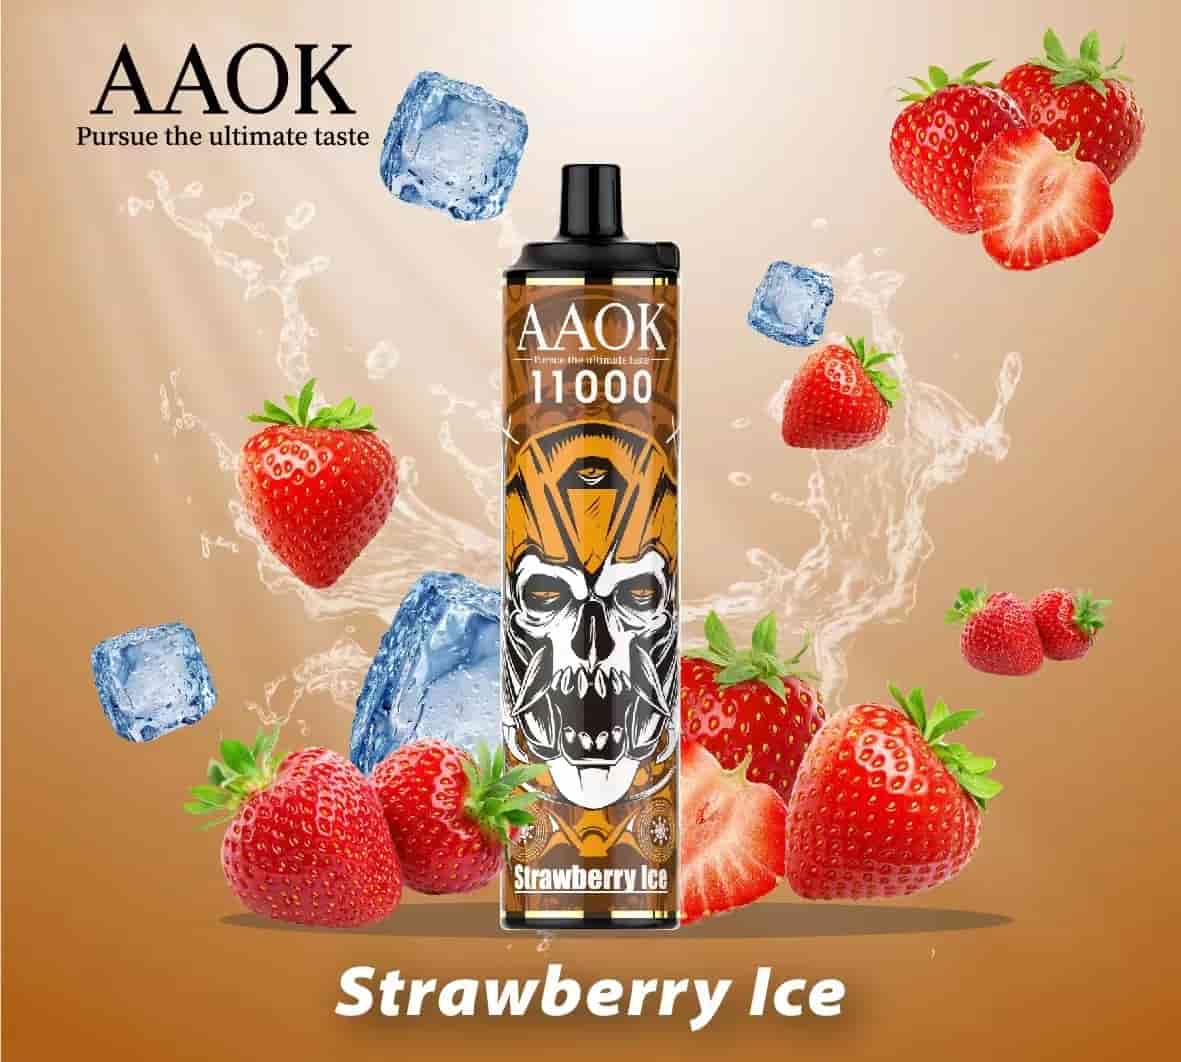 AAOK A83 Strawberry Ice (11000 Puffs)